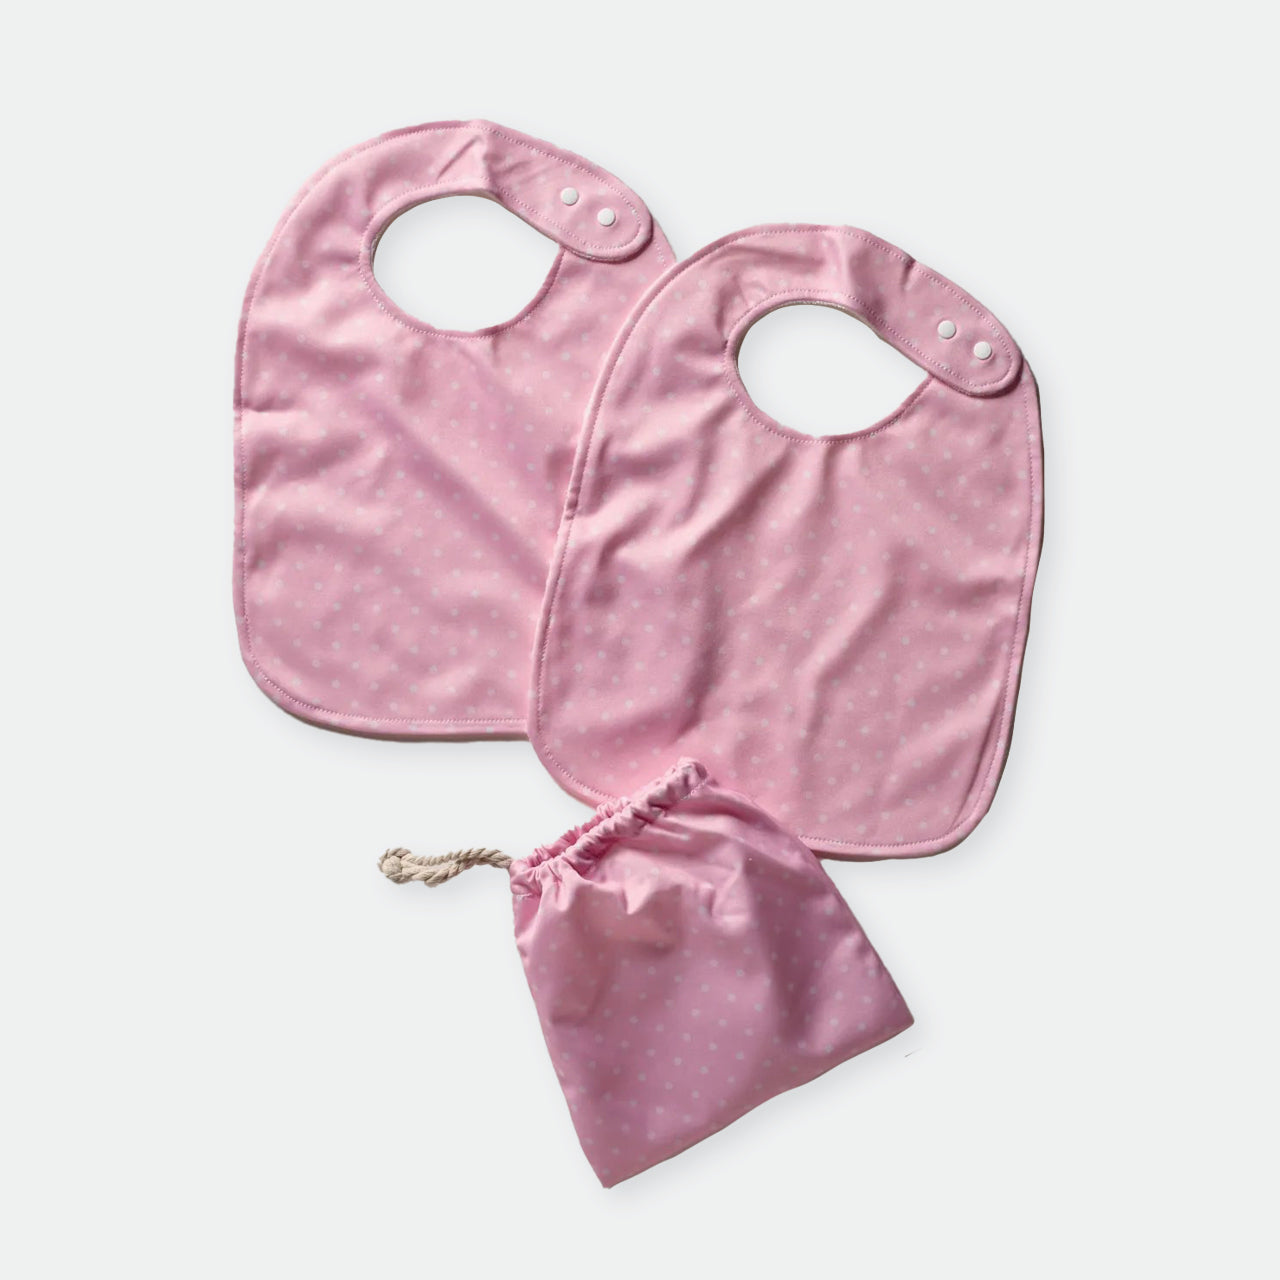 Baby Basics Pink Bibs and bag on a white background